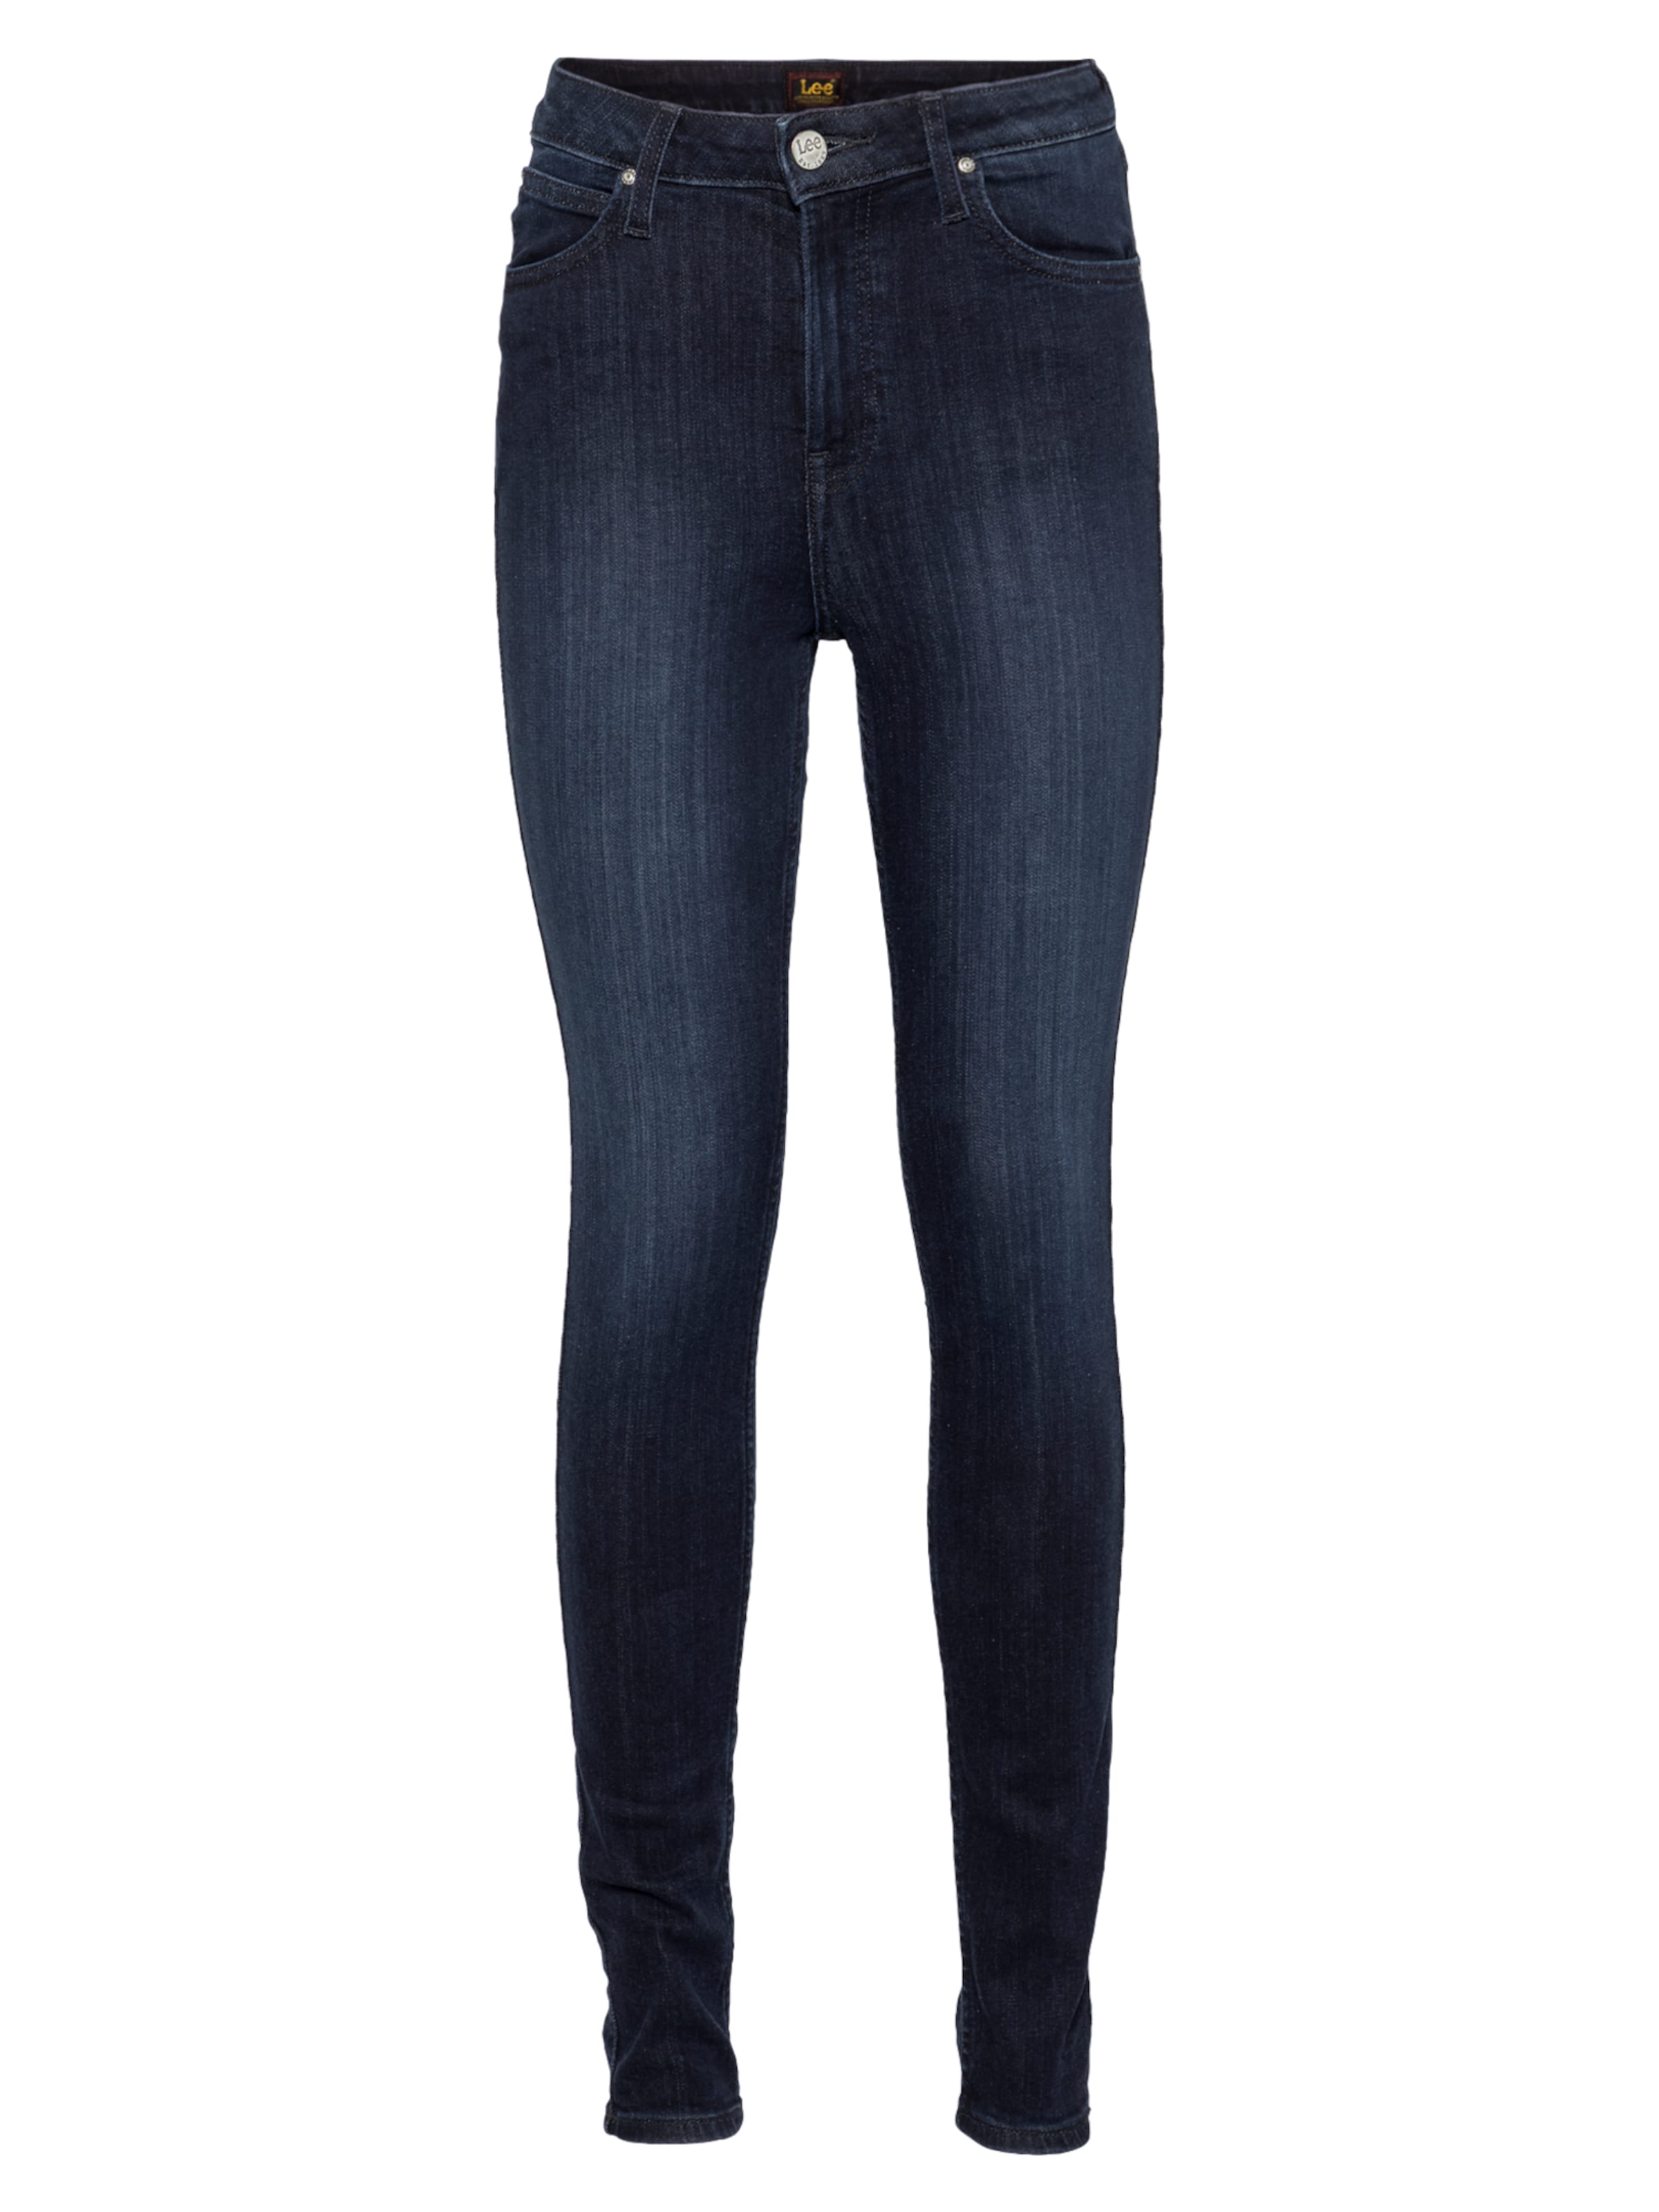 Jeans & pantaloni Donna Lee Jeans IVY in Blu Scuro 